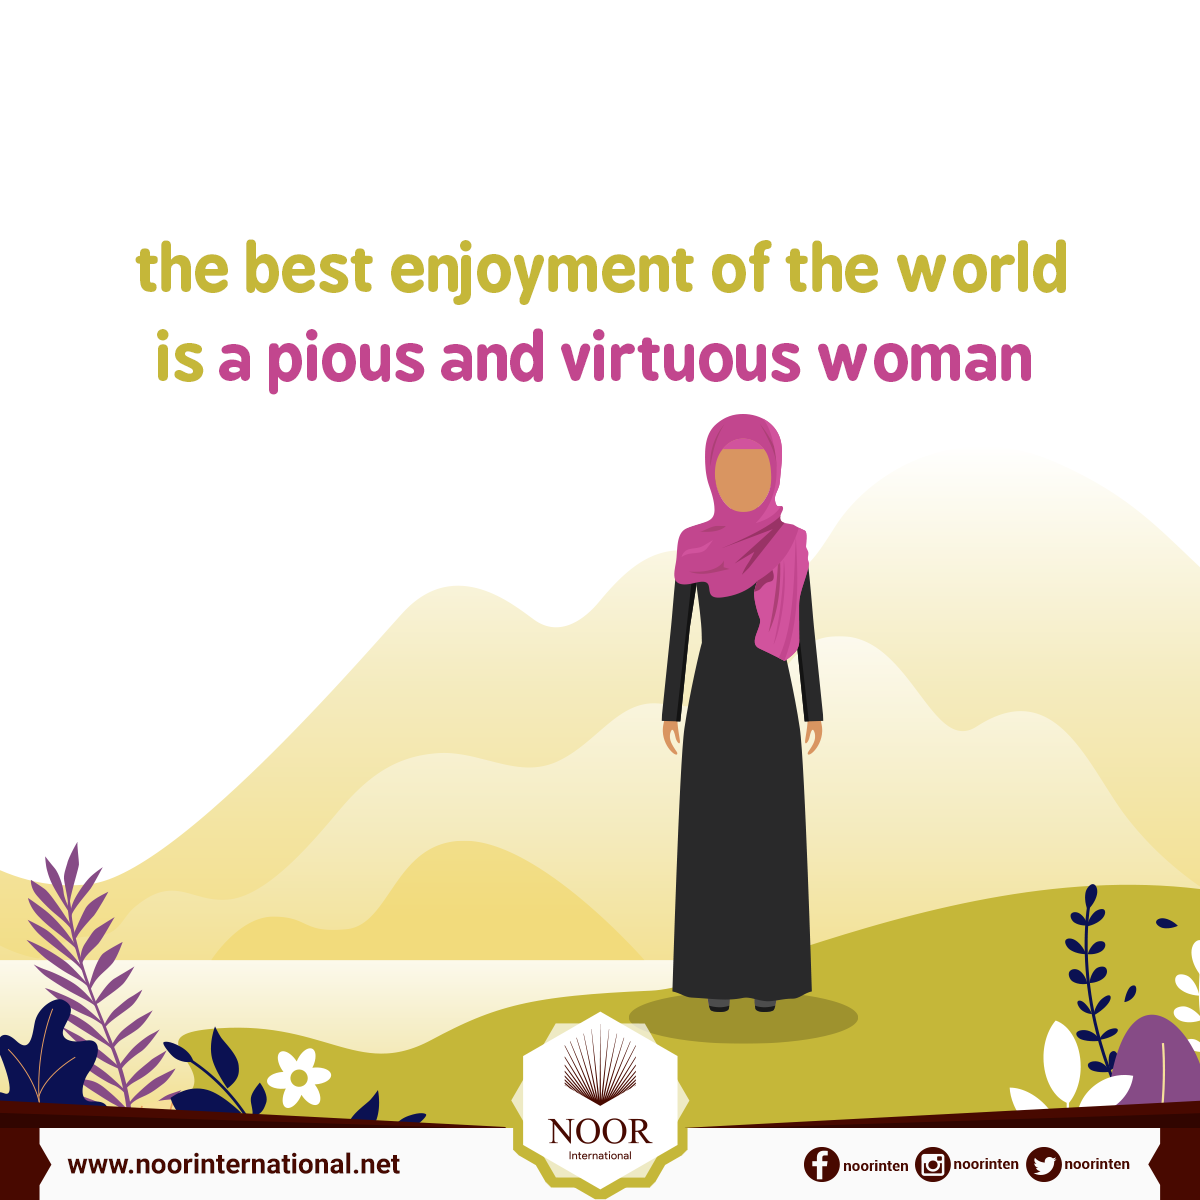 The best enjoyment of the world is a pious and virtuous woman